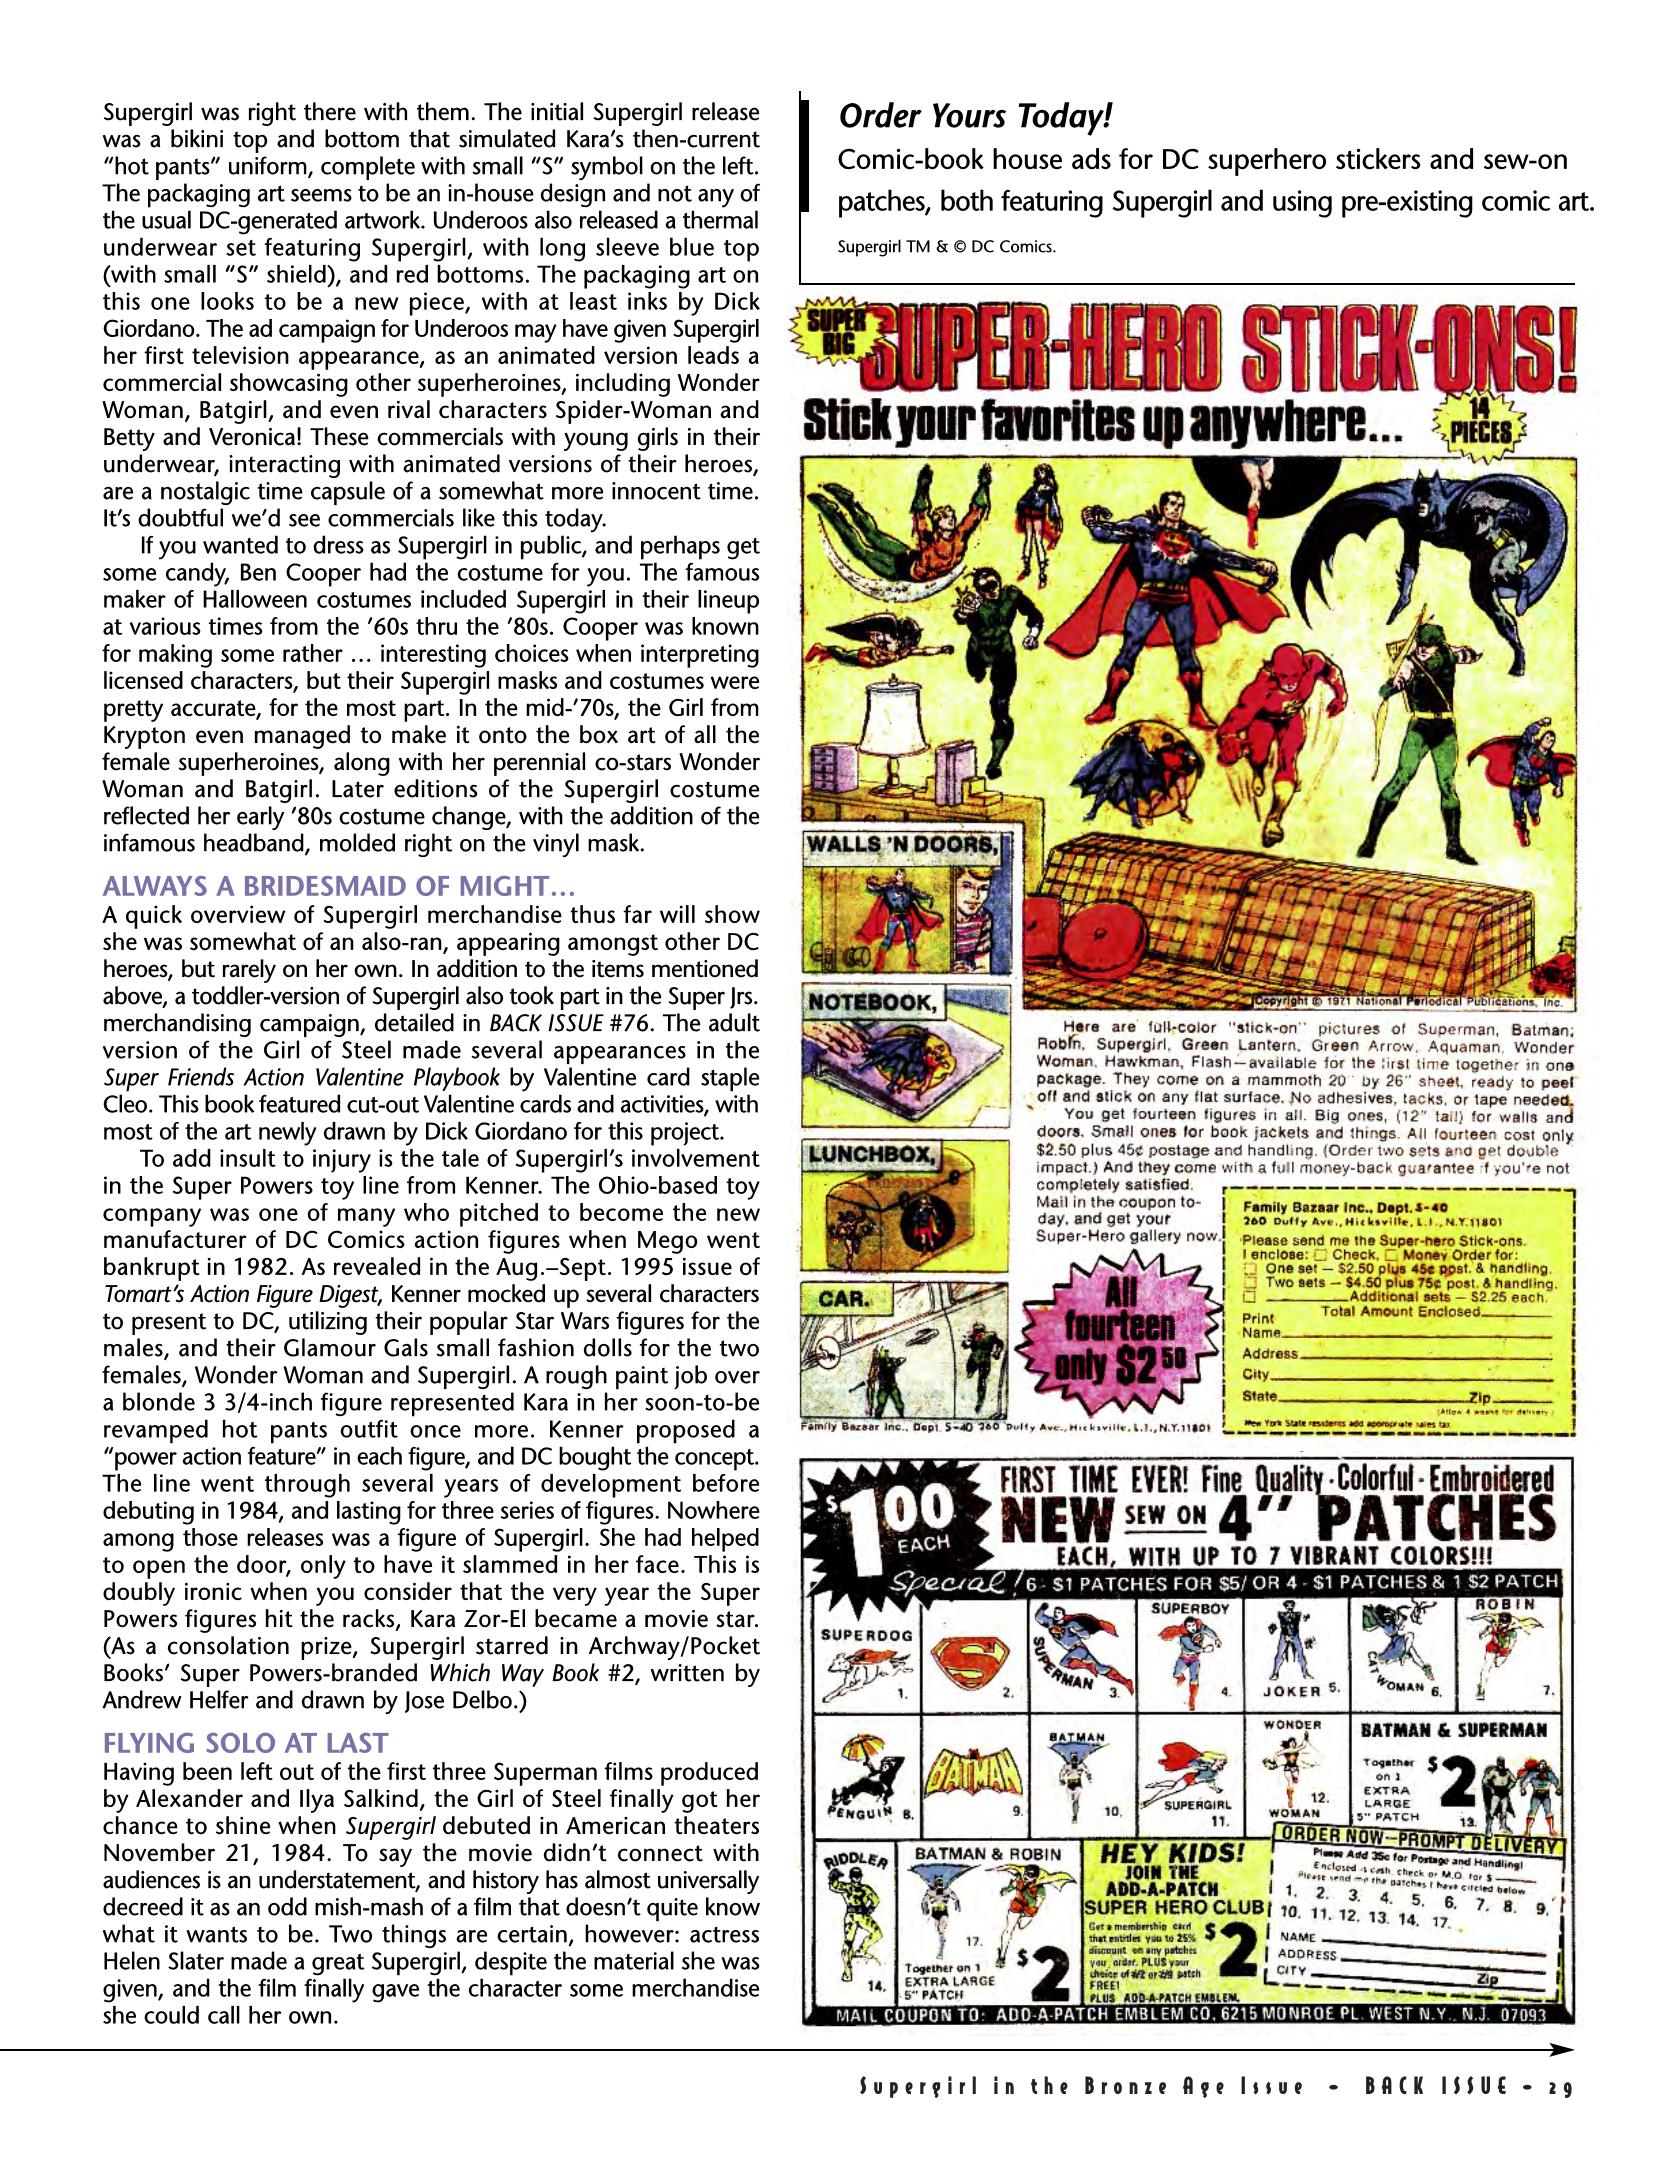 Read online Back Issue comic -  Issue #84 - 25